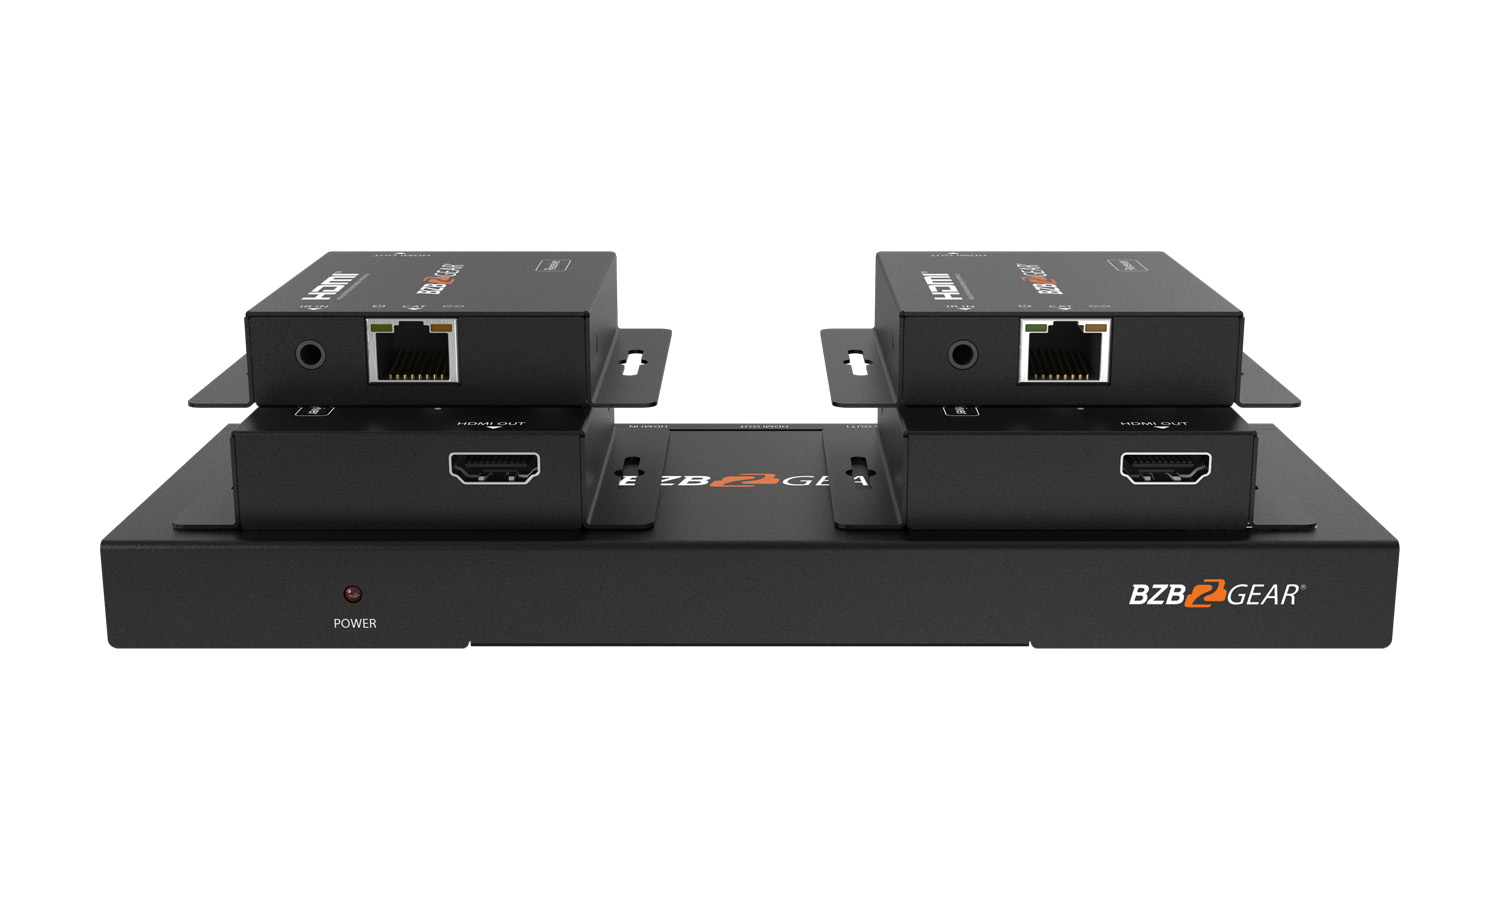 BG-HDA-E14 1X4 1080P/4K30 HDMI Splitter/Distribution Amplifier up to 230ft over Category Cable by BZBGEAR